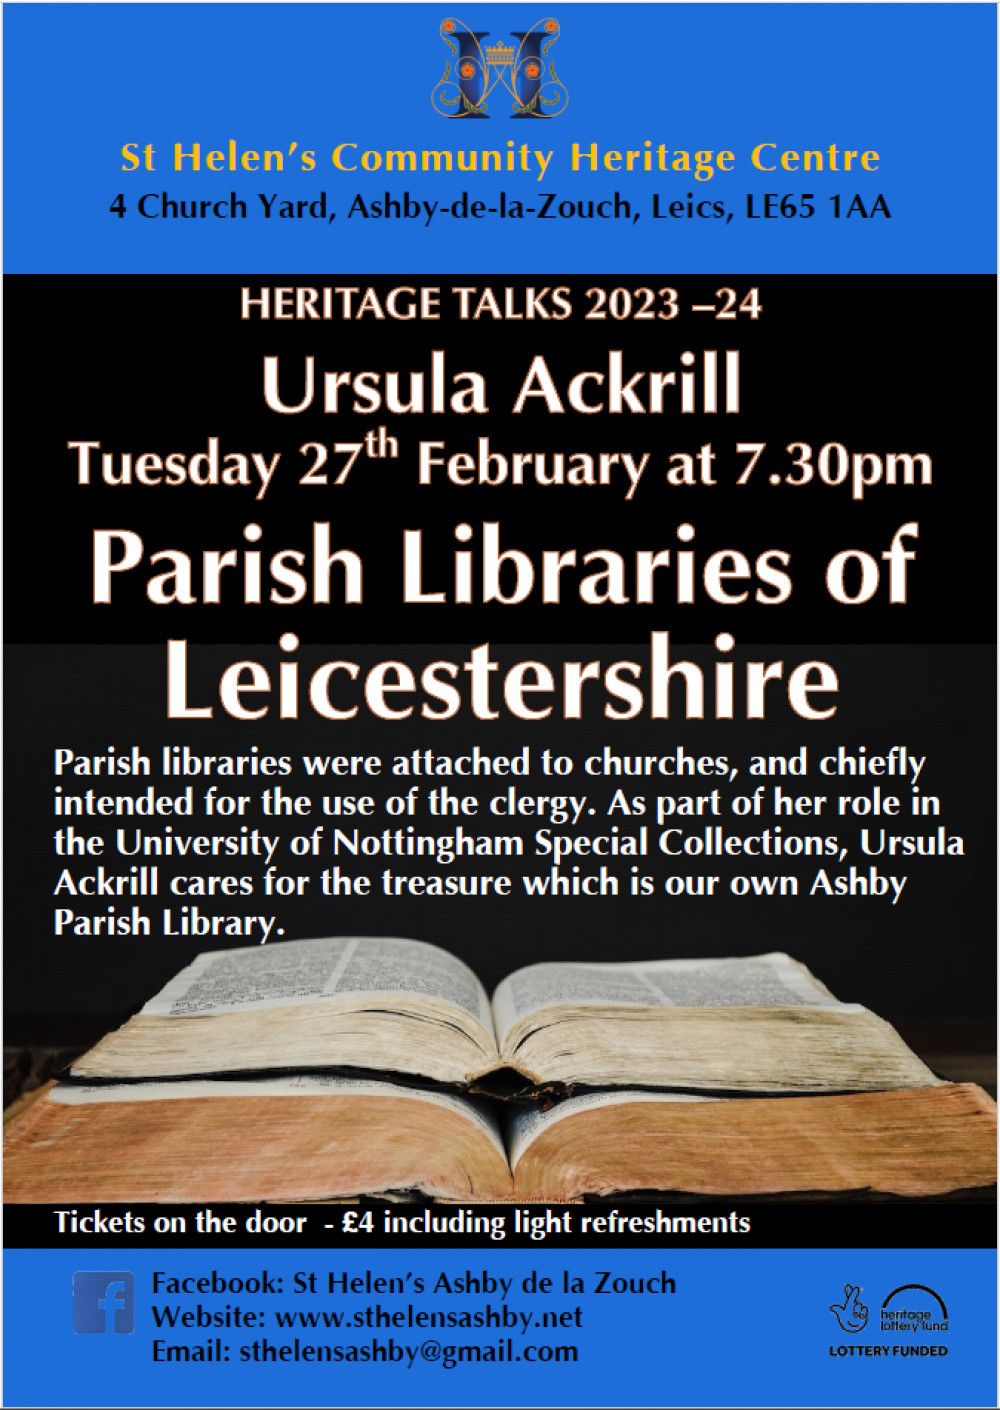 Parish Libraries of Leicestershire at St Helen's Community Heritage Centre, Ashby de la Zouch